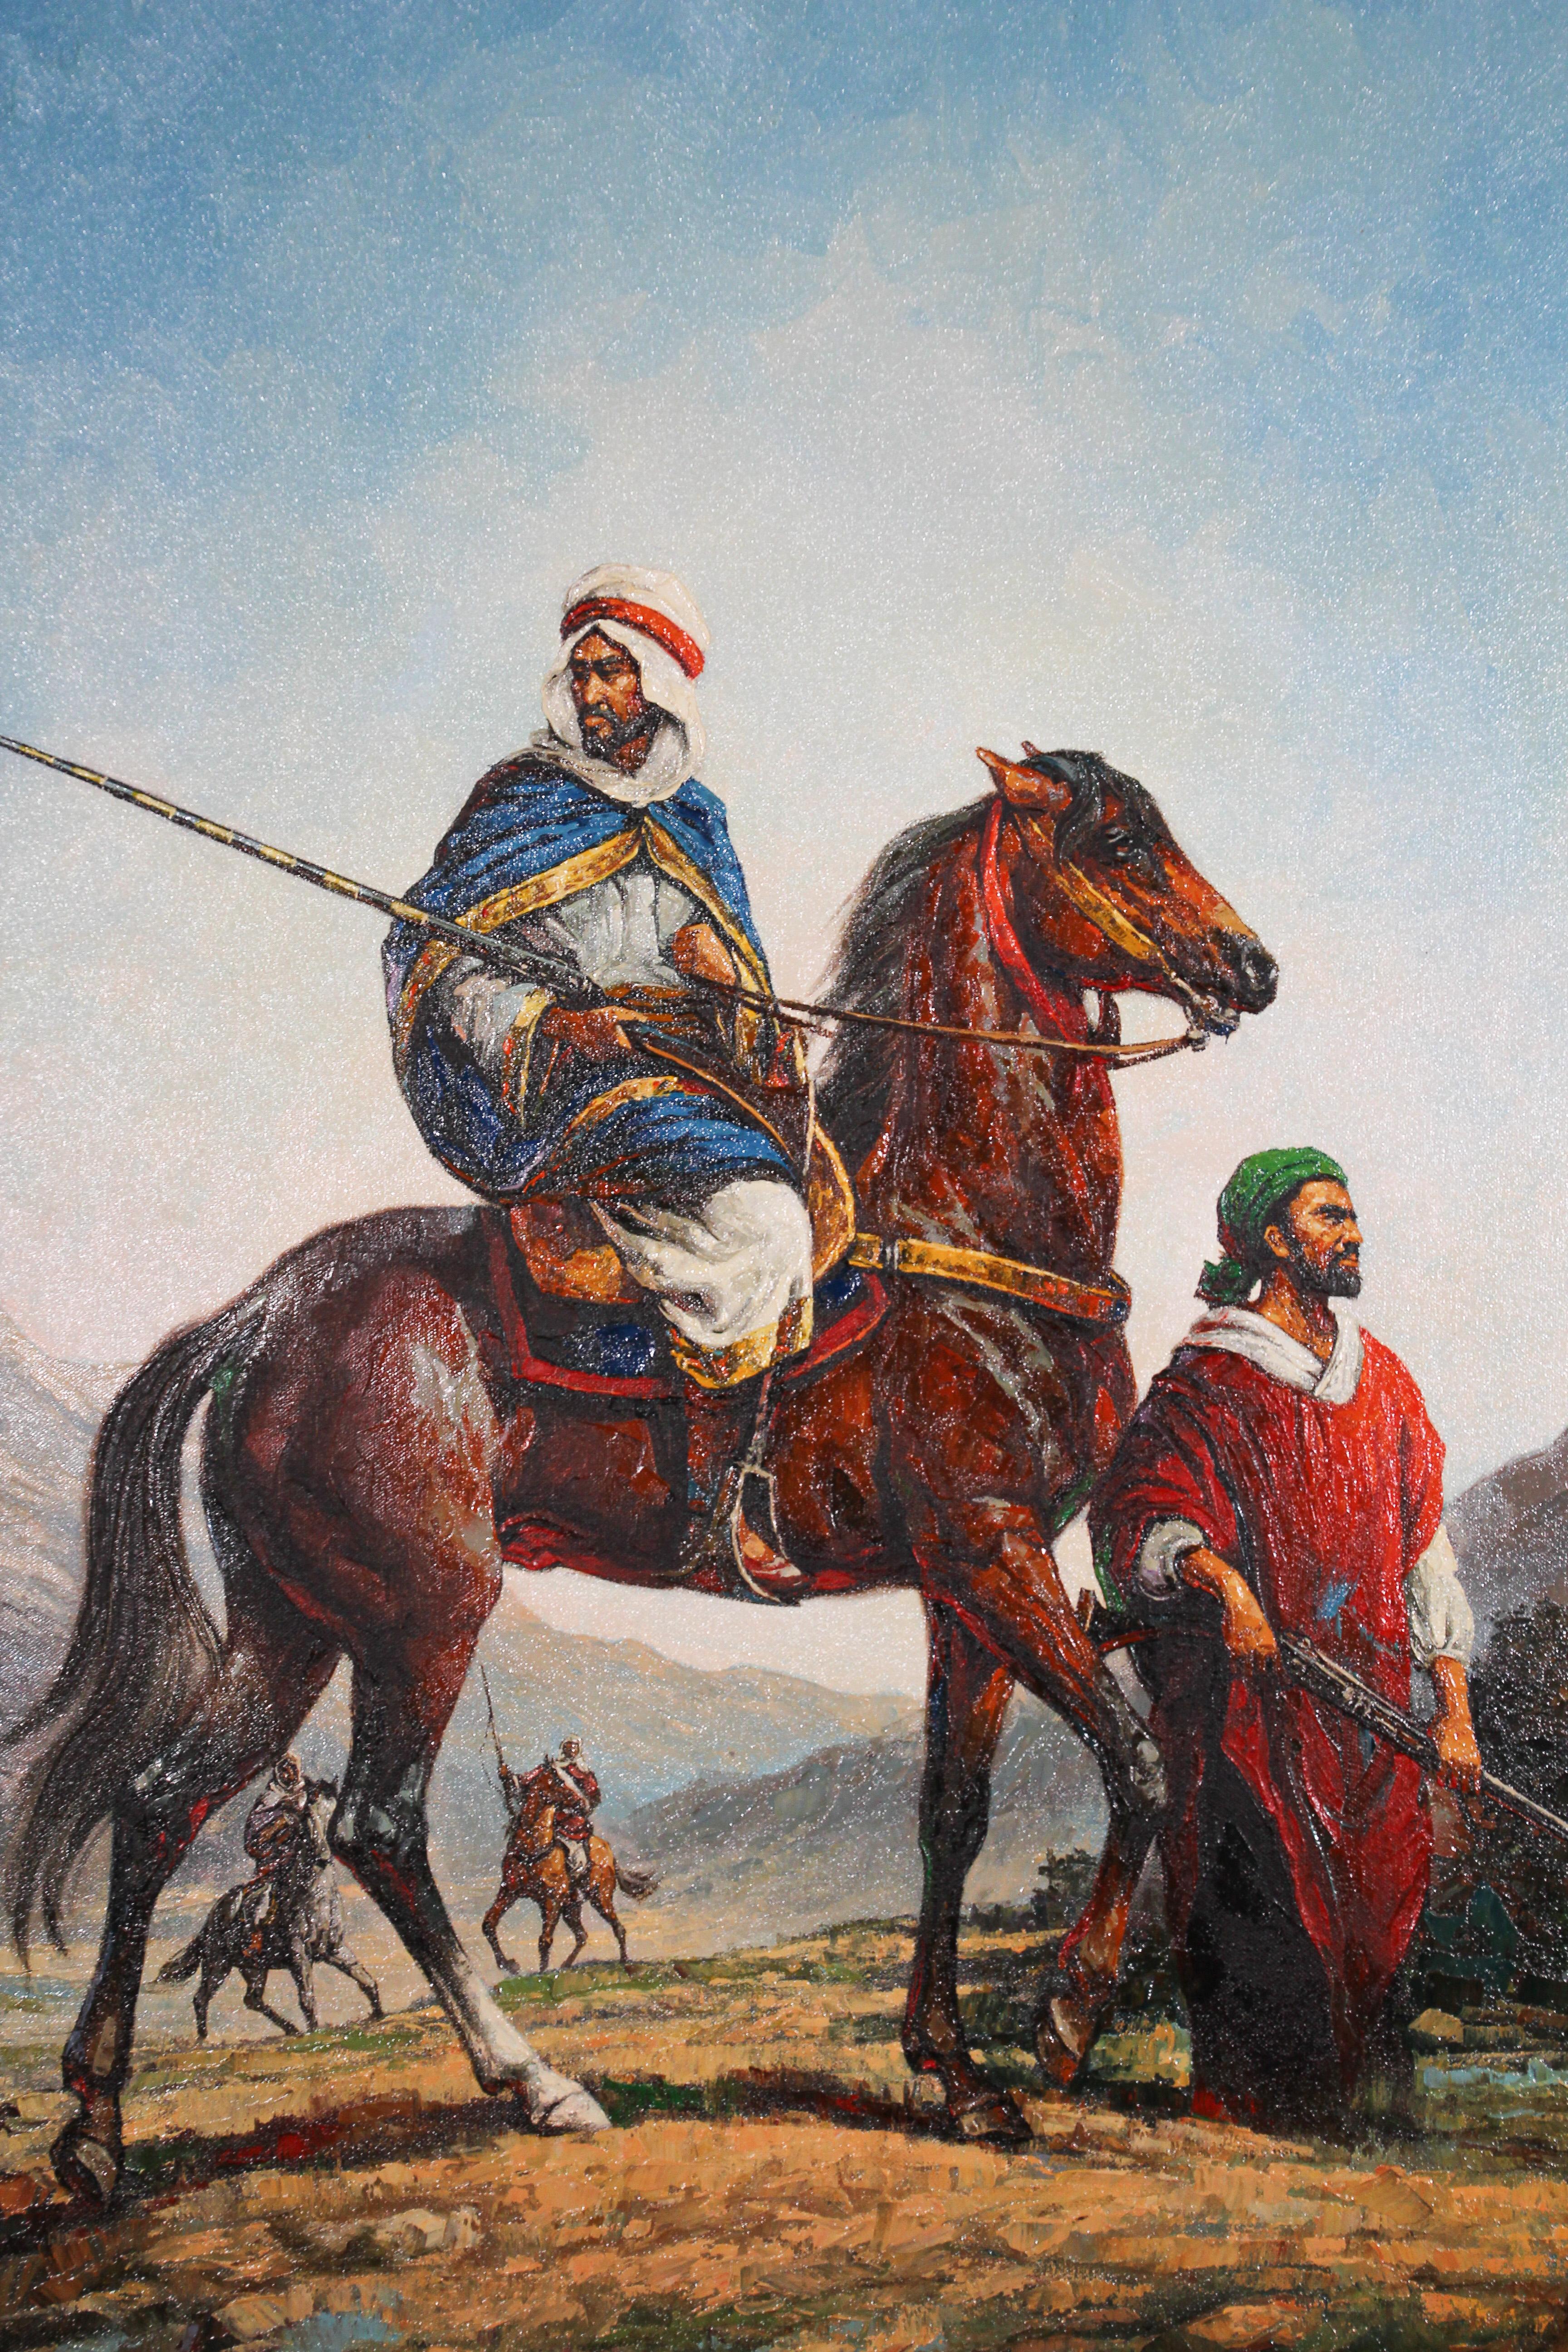 Moroccan Orientalist oil on canvas painting of a 19th century Moroccan men on horses scene.
Contemporary French Moroccan oil on canvas orientalist painting.
Painting is not old, not framed.
Signed on the left corner.